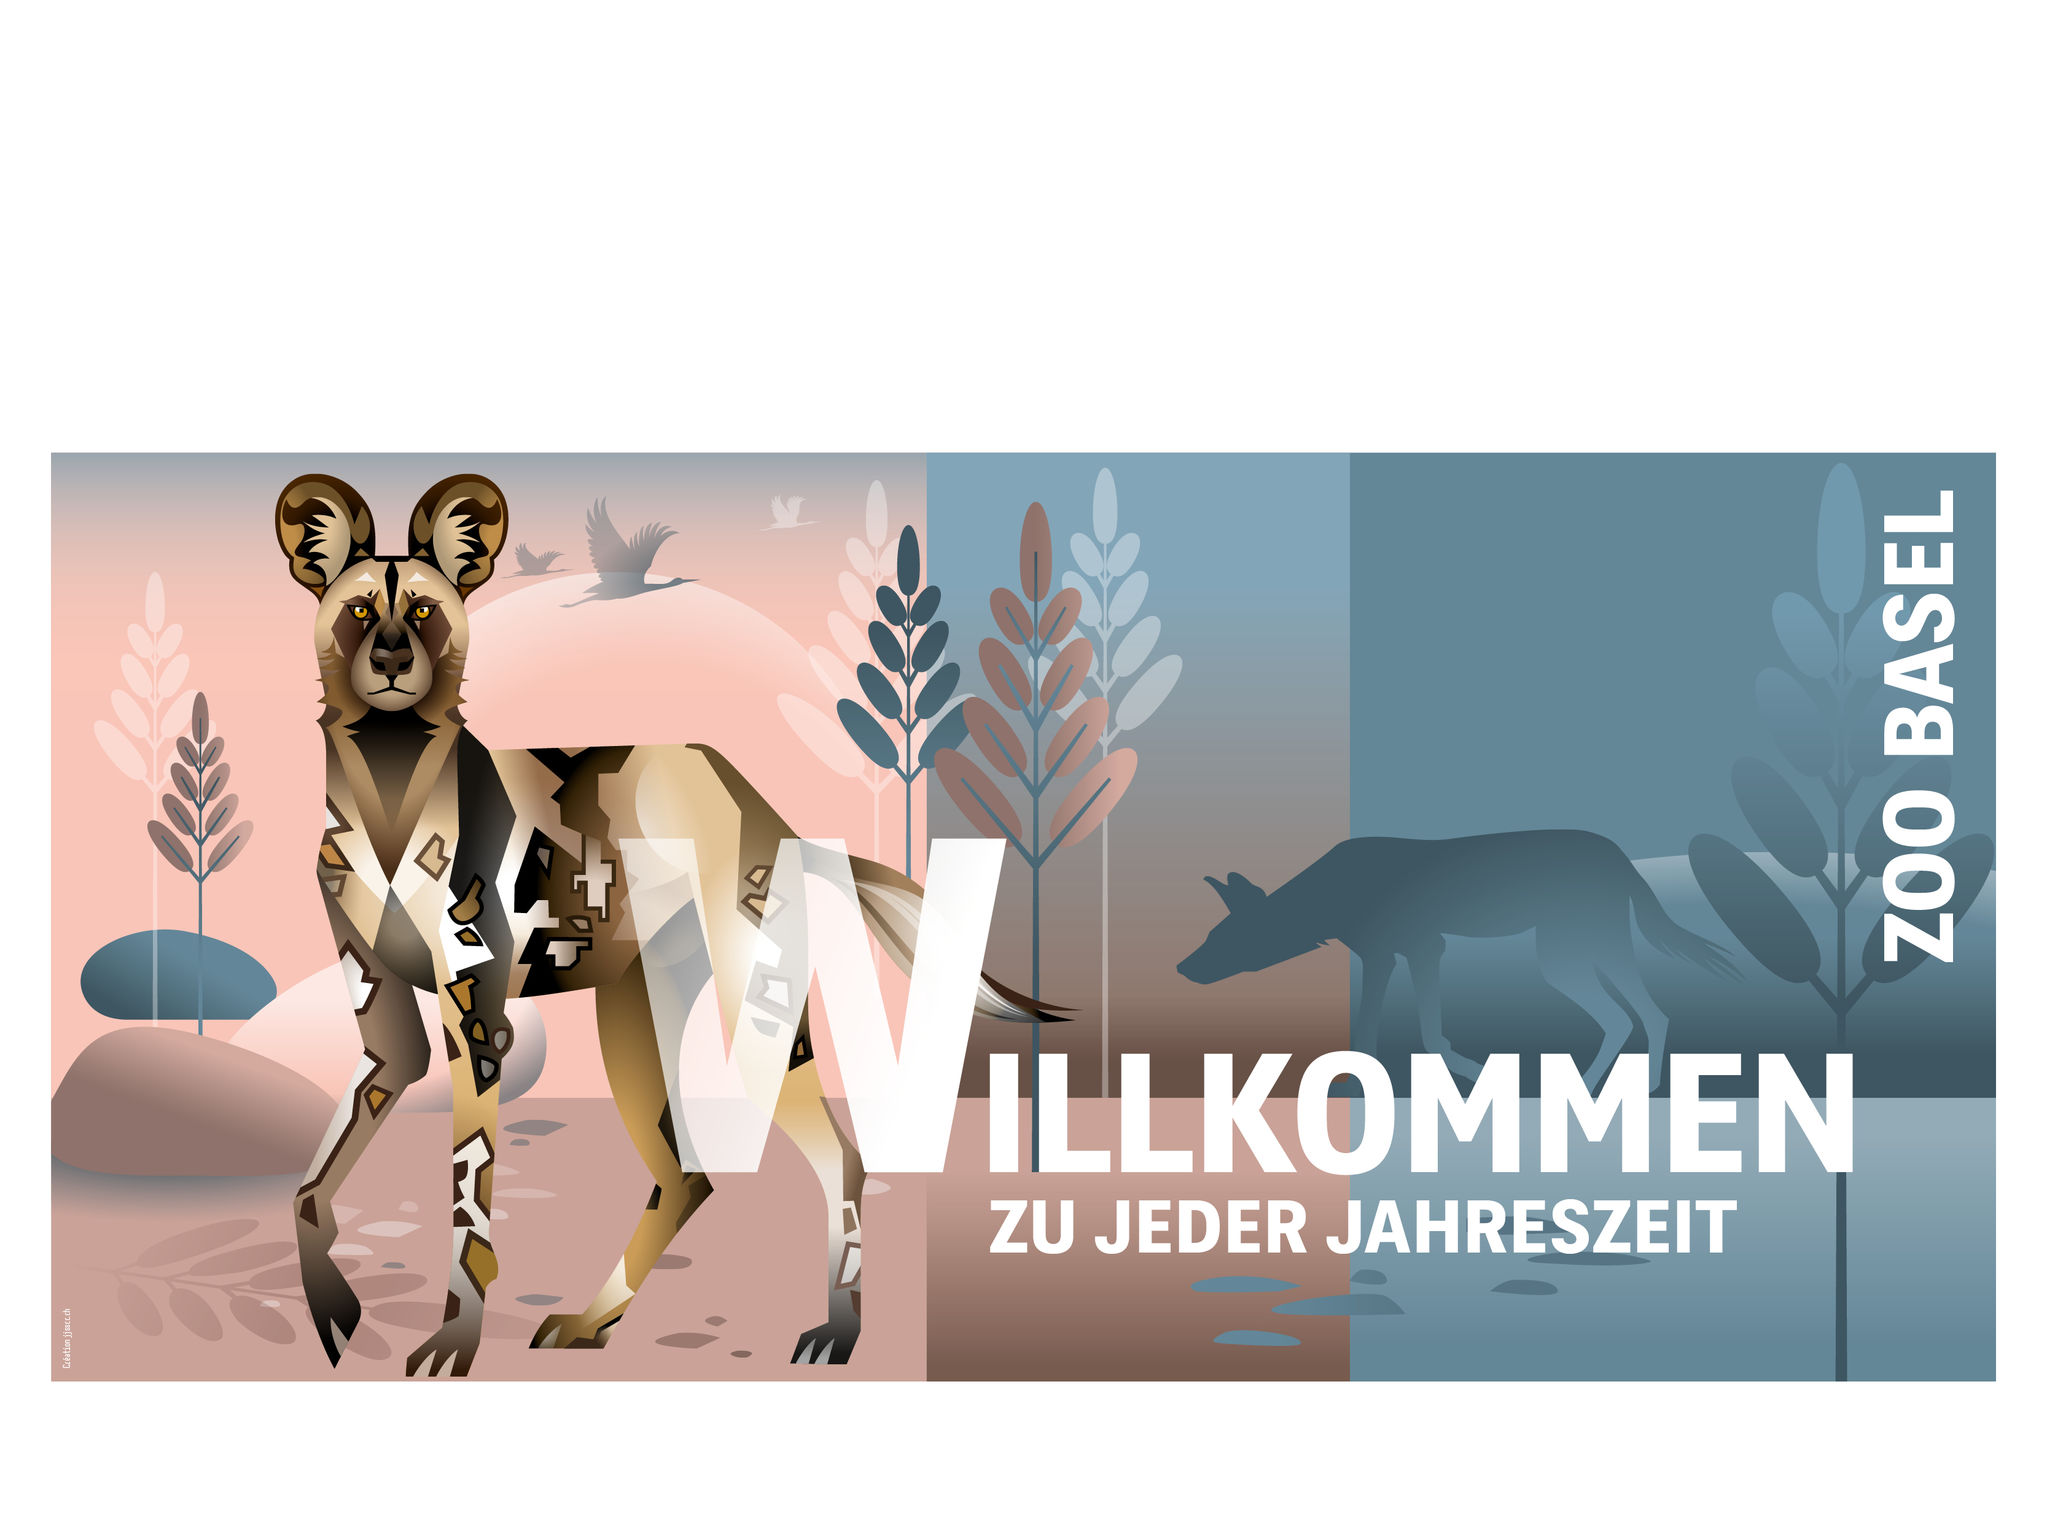 Zoo Basel Advertising Campaign